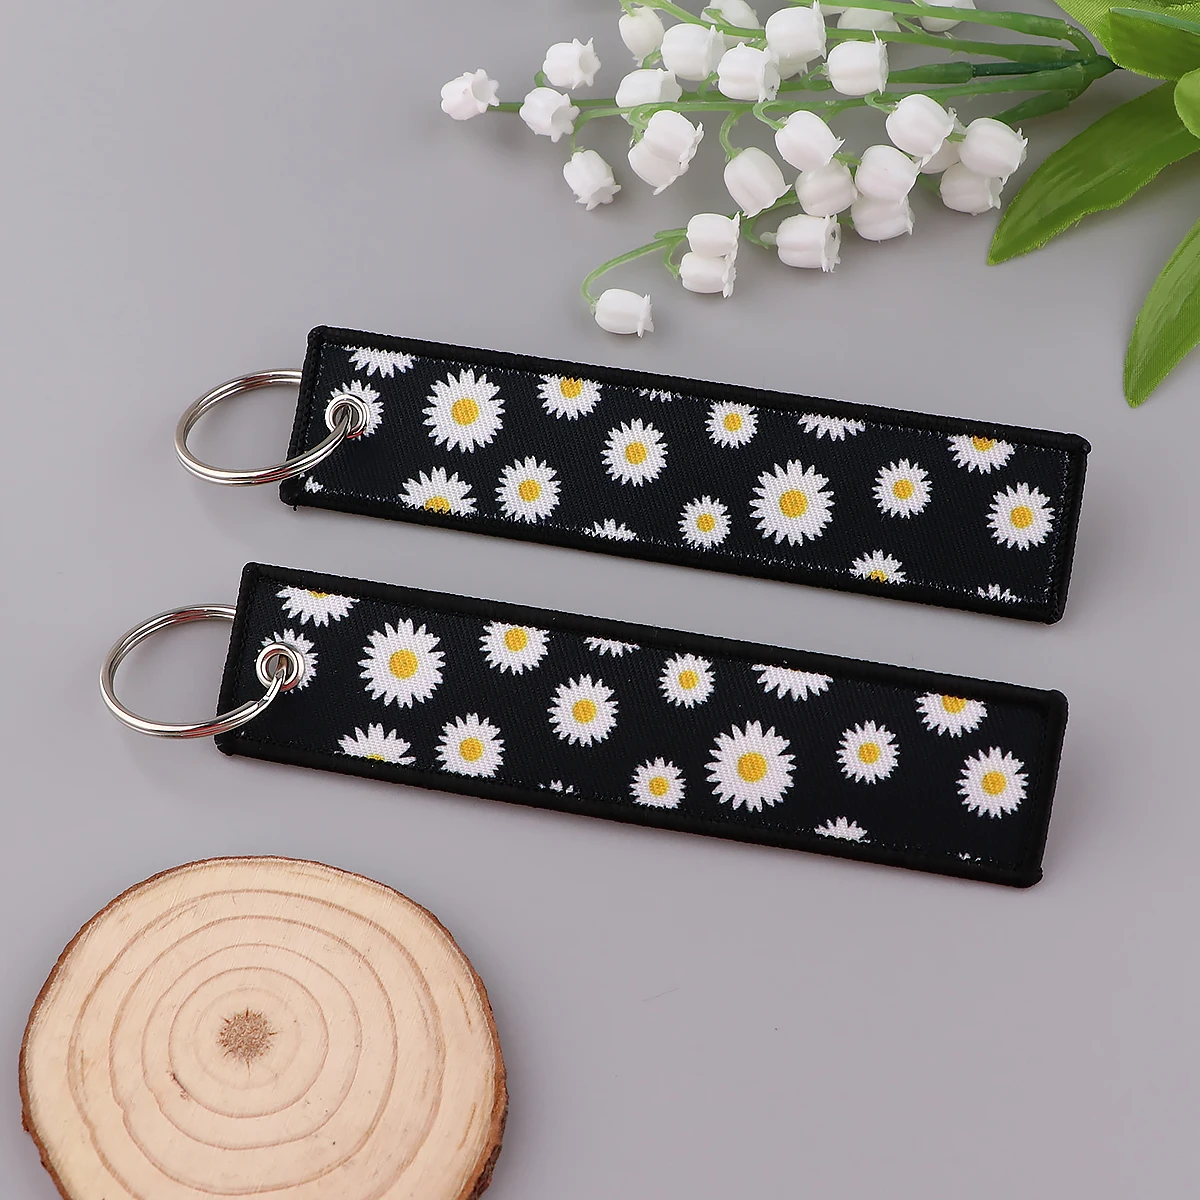 

Embroidered Daisy Cute Key Tag Keychains Women Anime Keychain for Car Motorcycles Keys Keyring Men Holder Jewelry Gifts